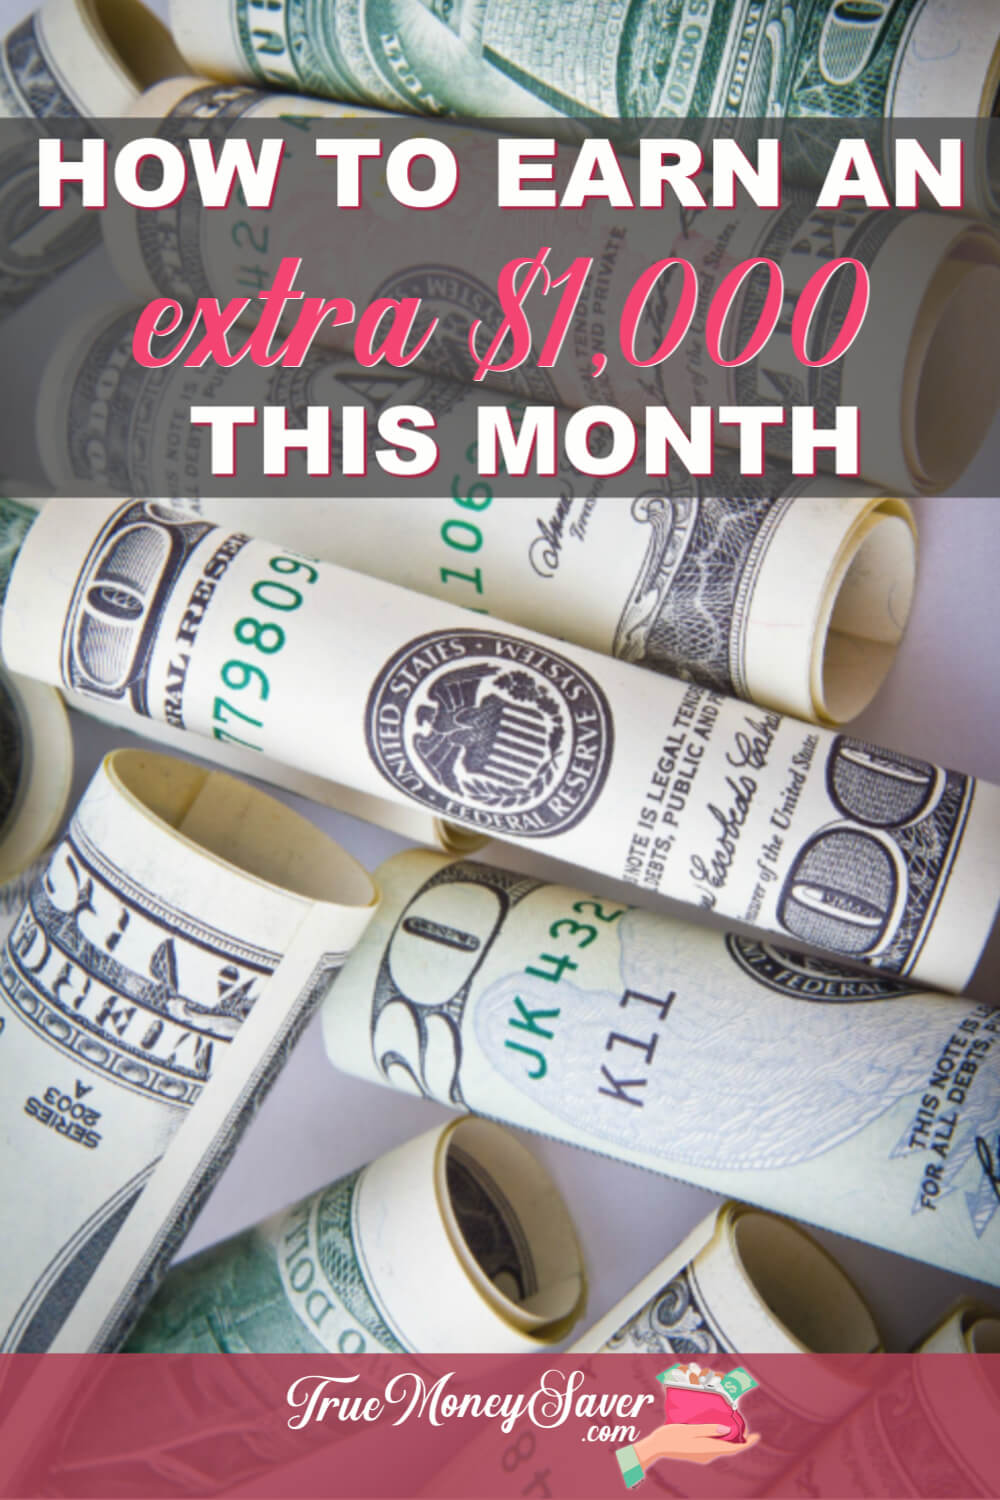 How To Earn An Extra $1,000 This Month